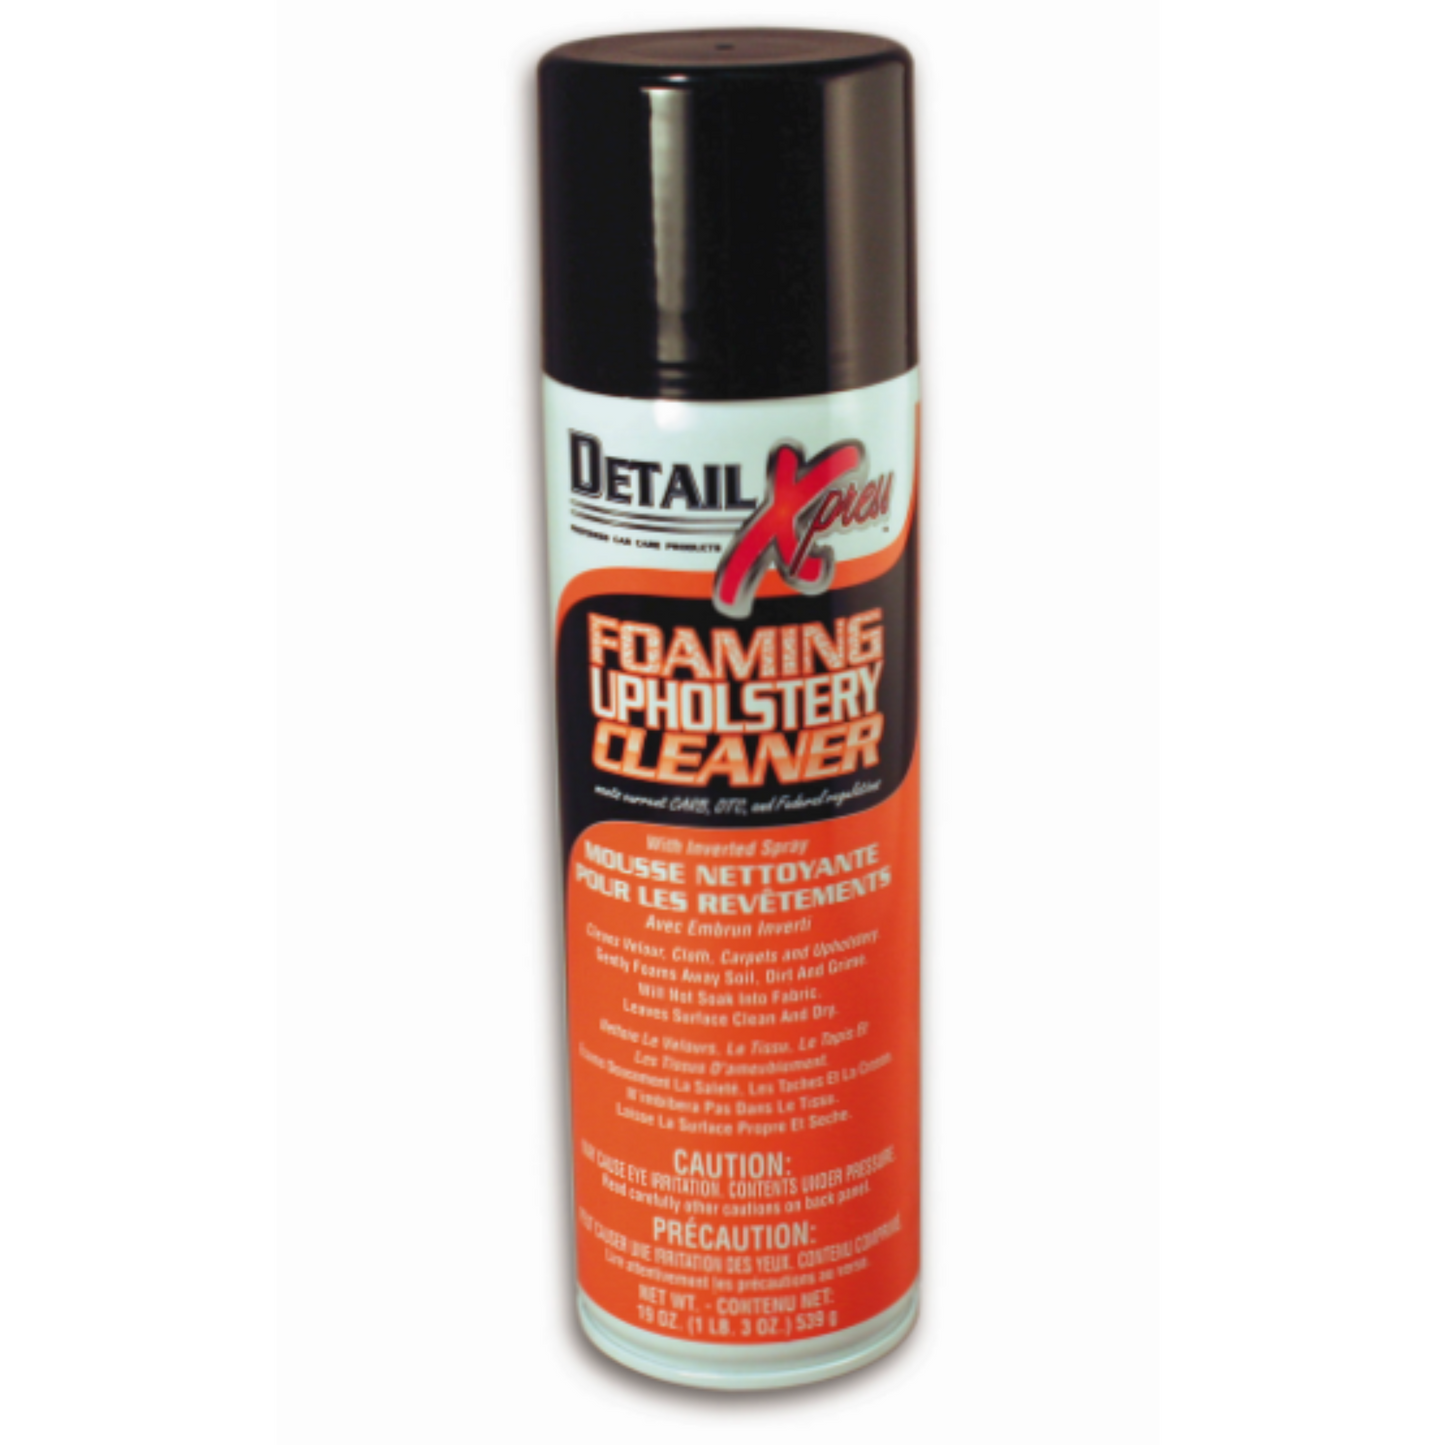 Detail Xpress Foaming Upholstery Cleaner 19 oz. - Case Price